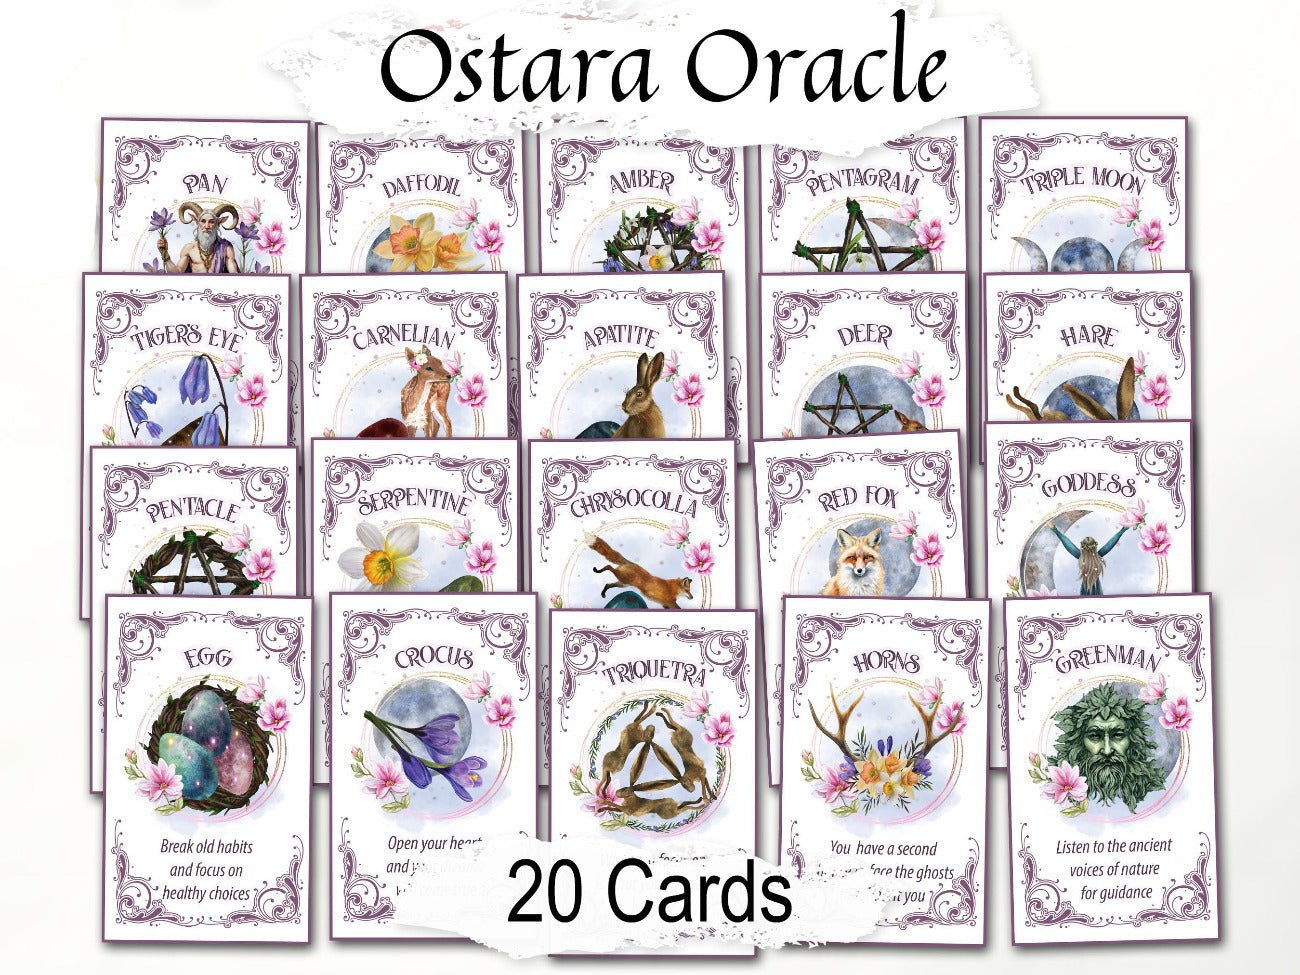 OSTARA ORACLE CARDS, Printable Tarot Messages, Wicca Goddess, Inspirational Altar Deck, Wheel of the Year, Spring Equinox, Divine Messages - Morgana Magick Spell